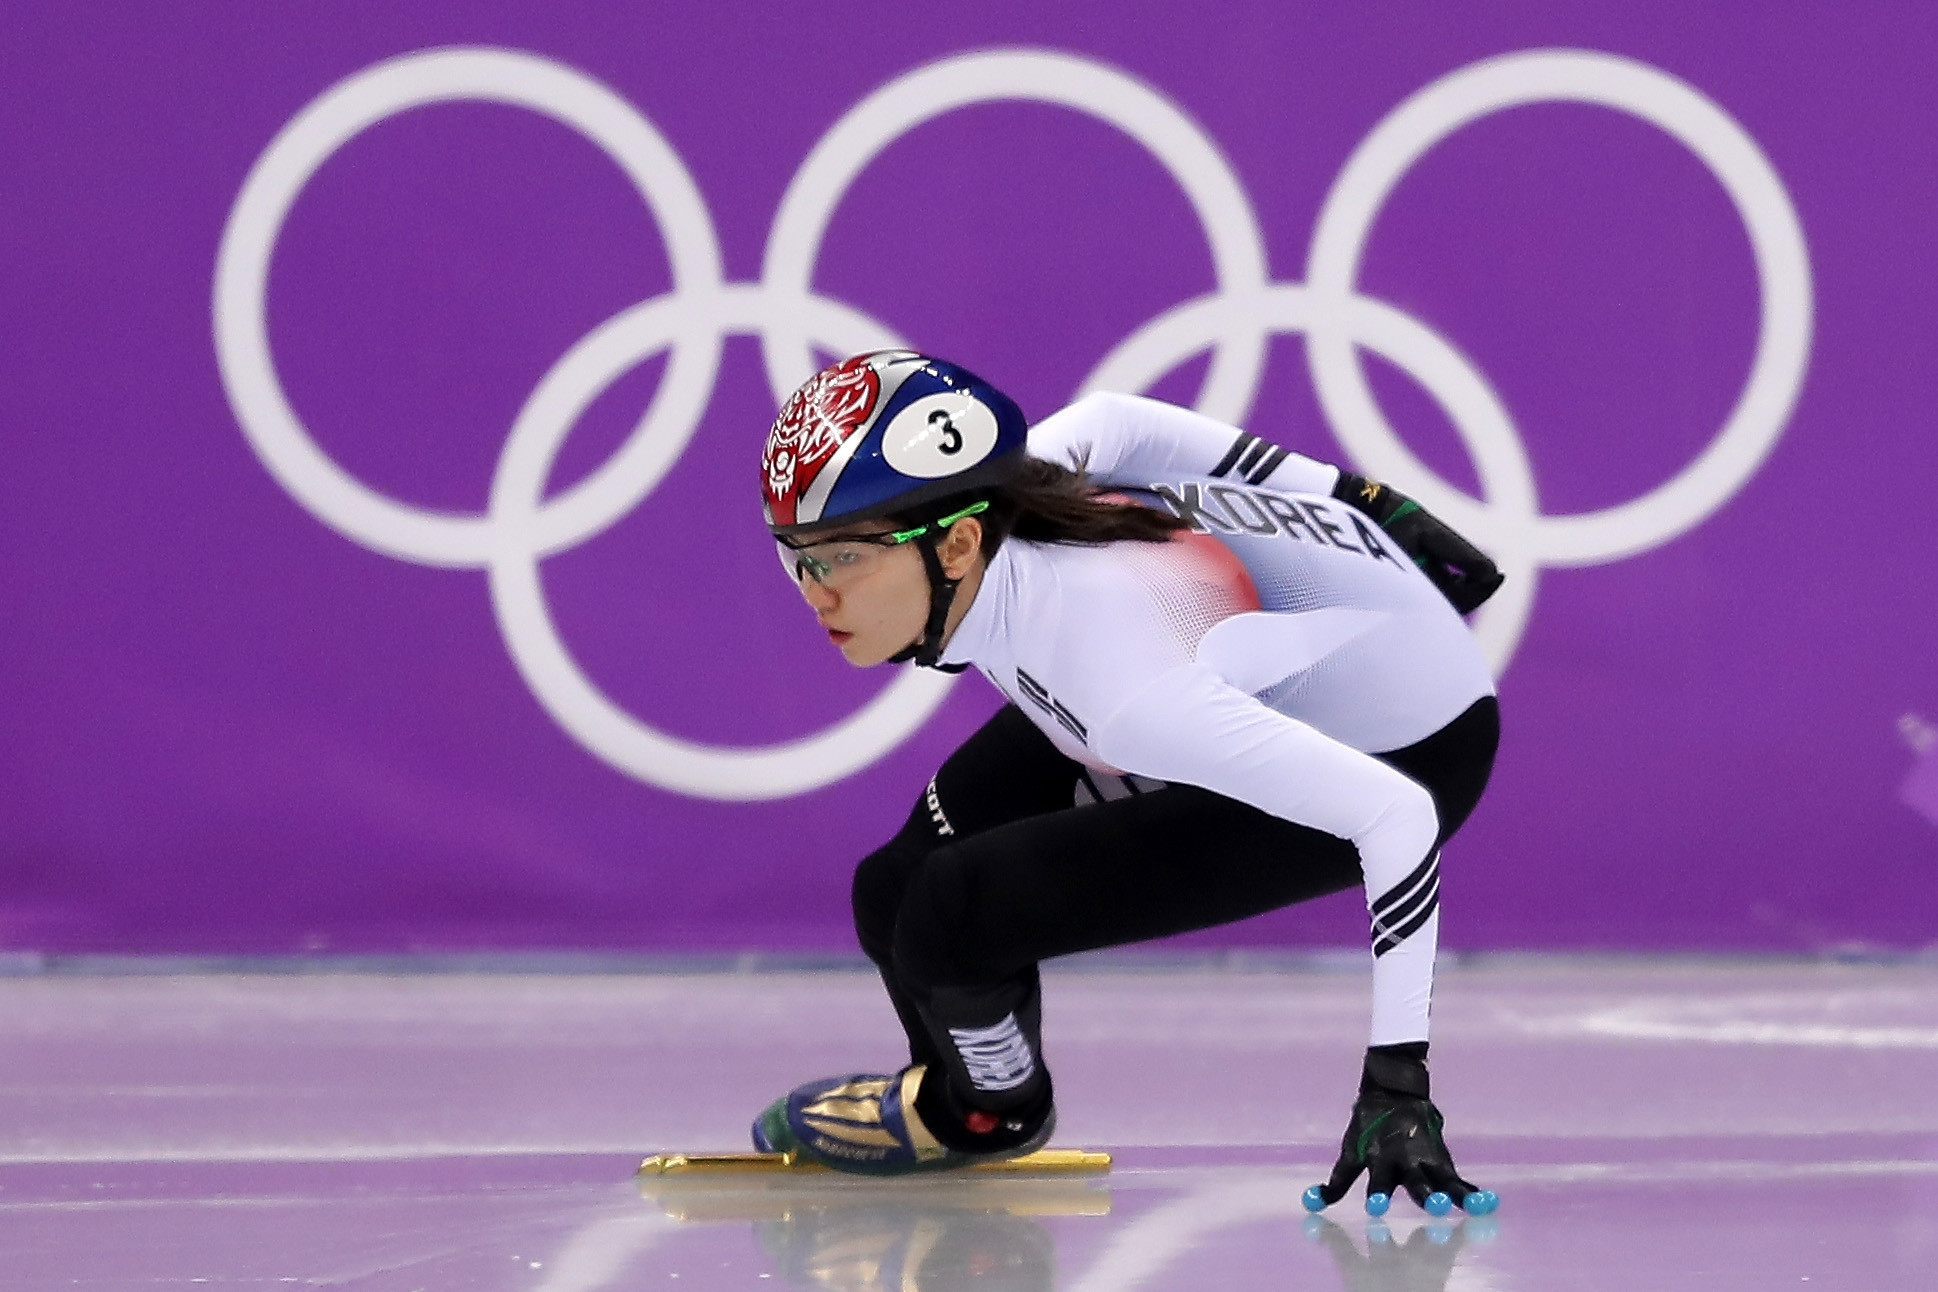 Shim Suk-hee is back in action after serving a two-month that resulted in her missing the Beijing 2022 Winter Olympics ©Getty Images